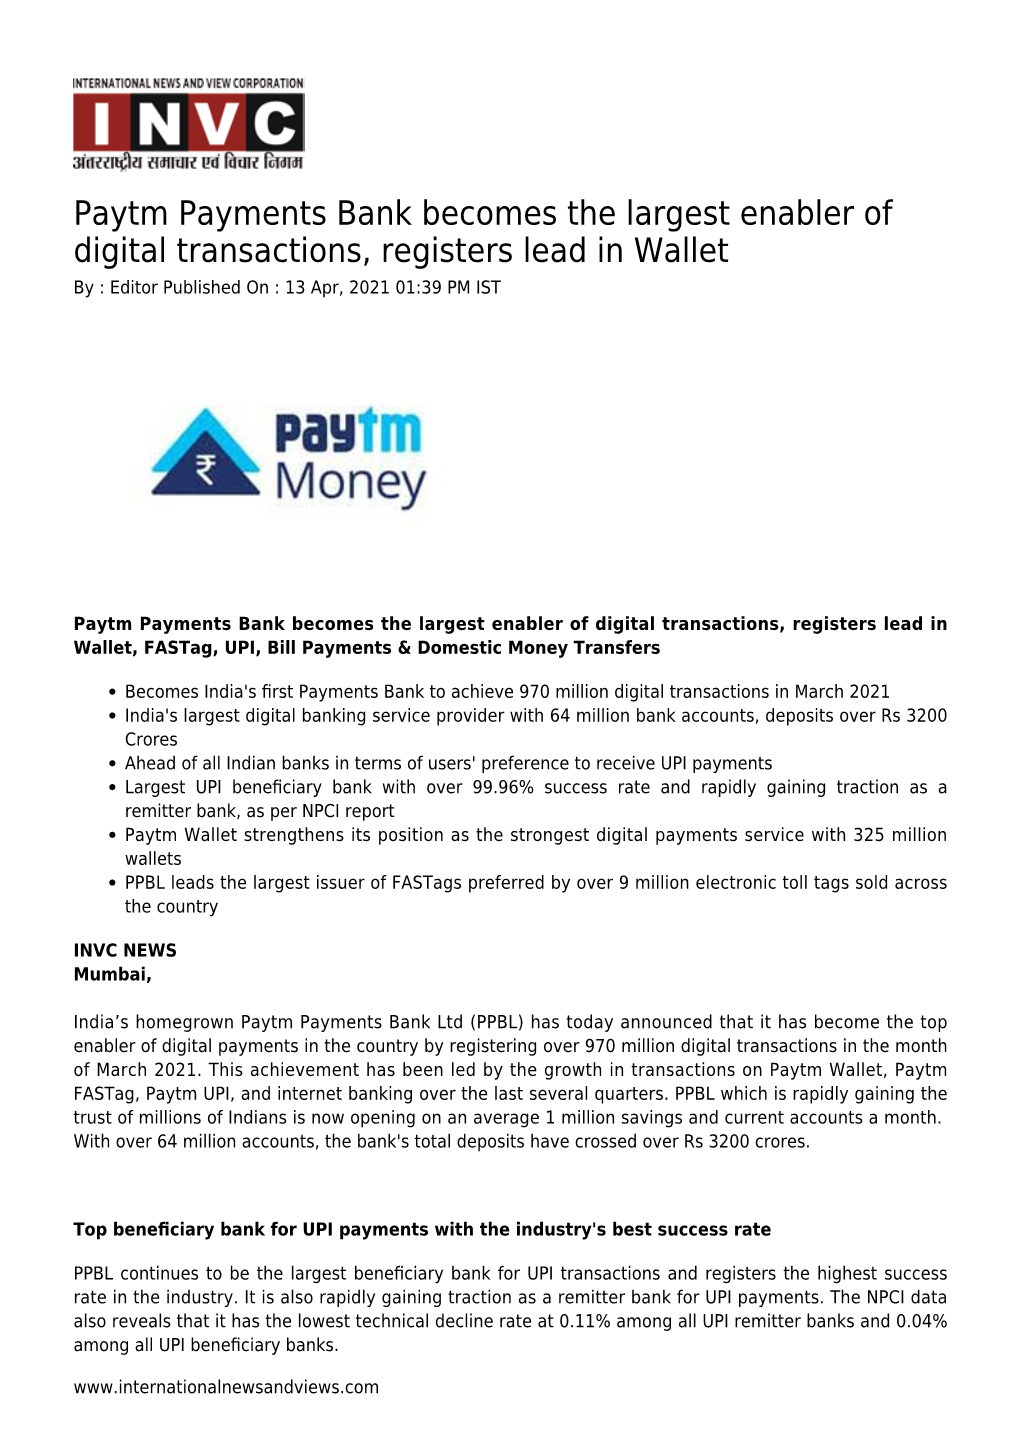 Paytm Payments Bank Becomes the Largest Enabler of Digital Transactions, Registers Lead in Wallet by : Editor Published on : 13 Apr, 2021 01:39 PM IST